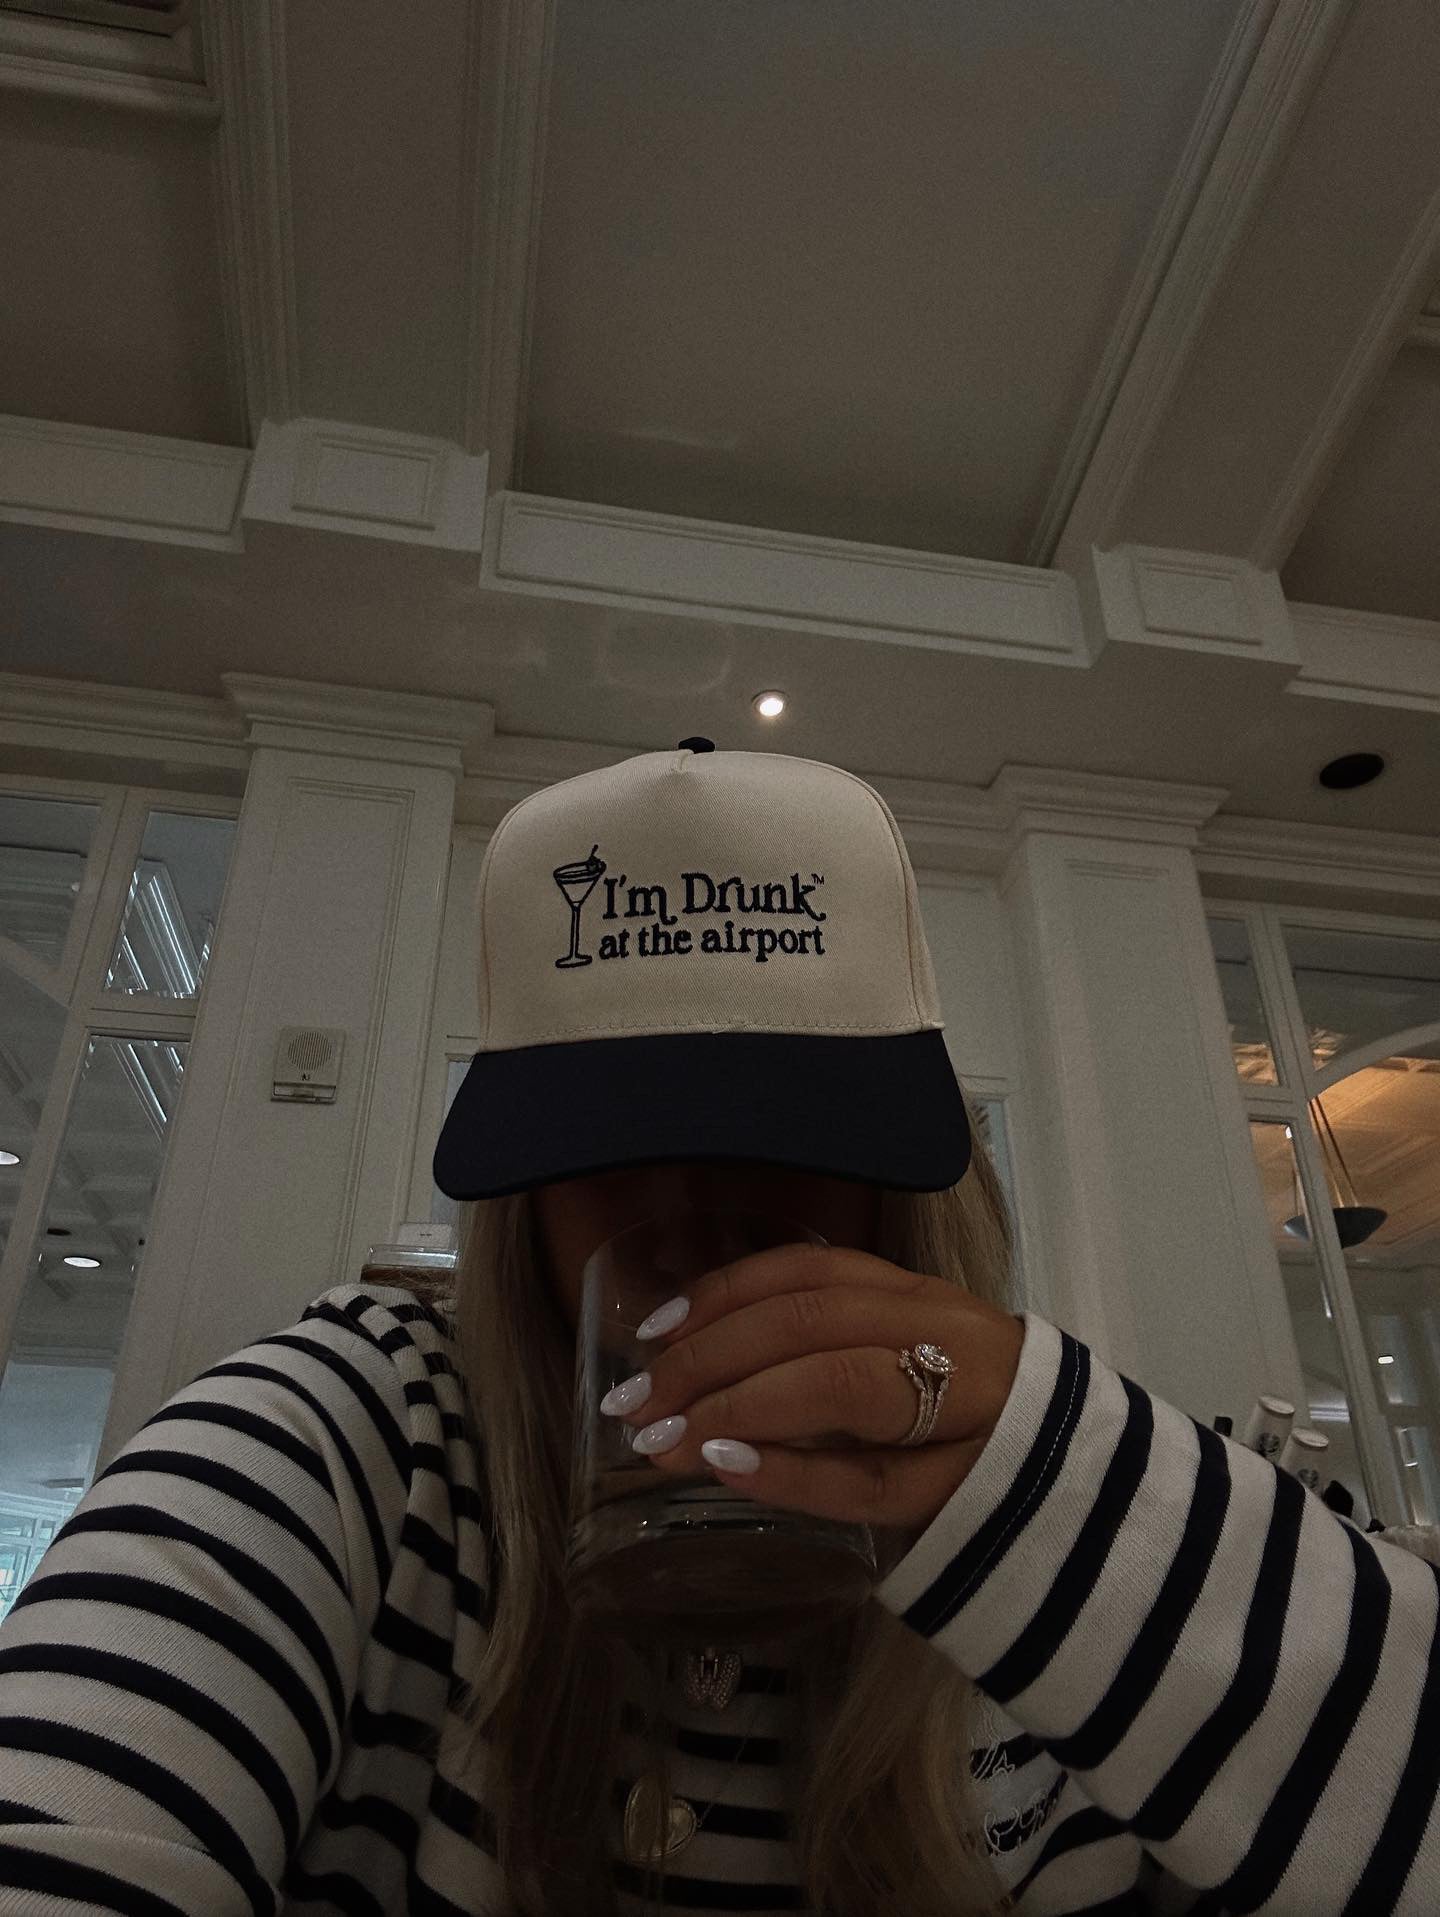 "Drunk At The Airport" Vintage Trucker Hat